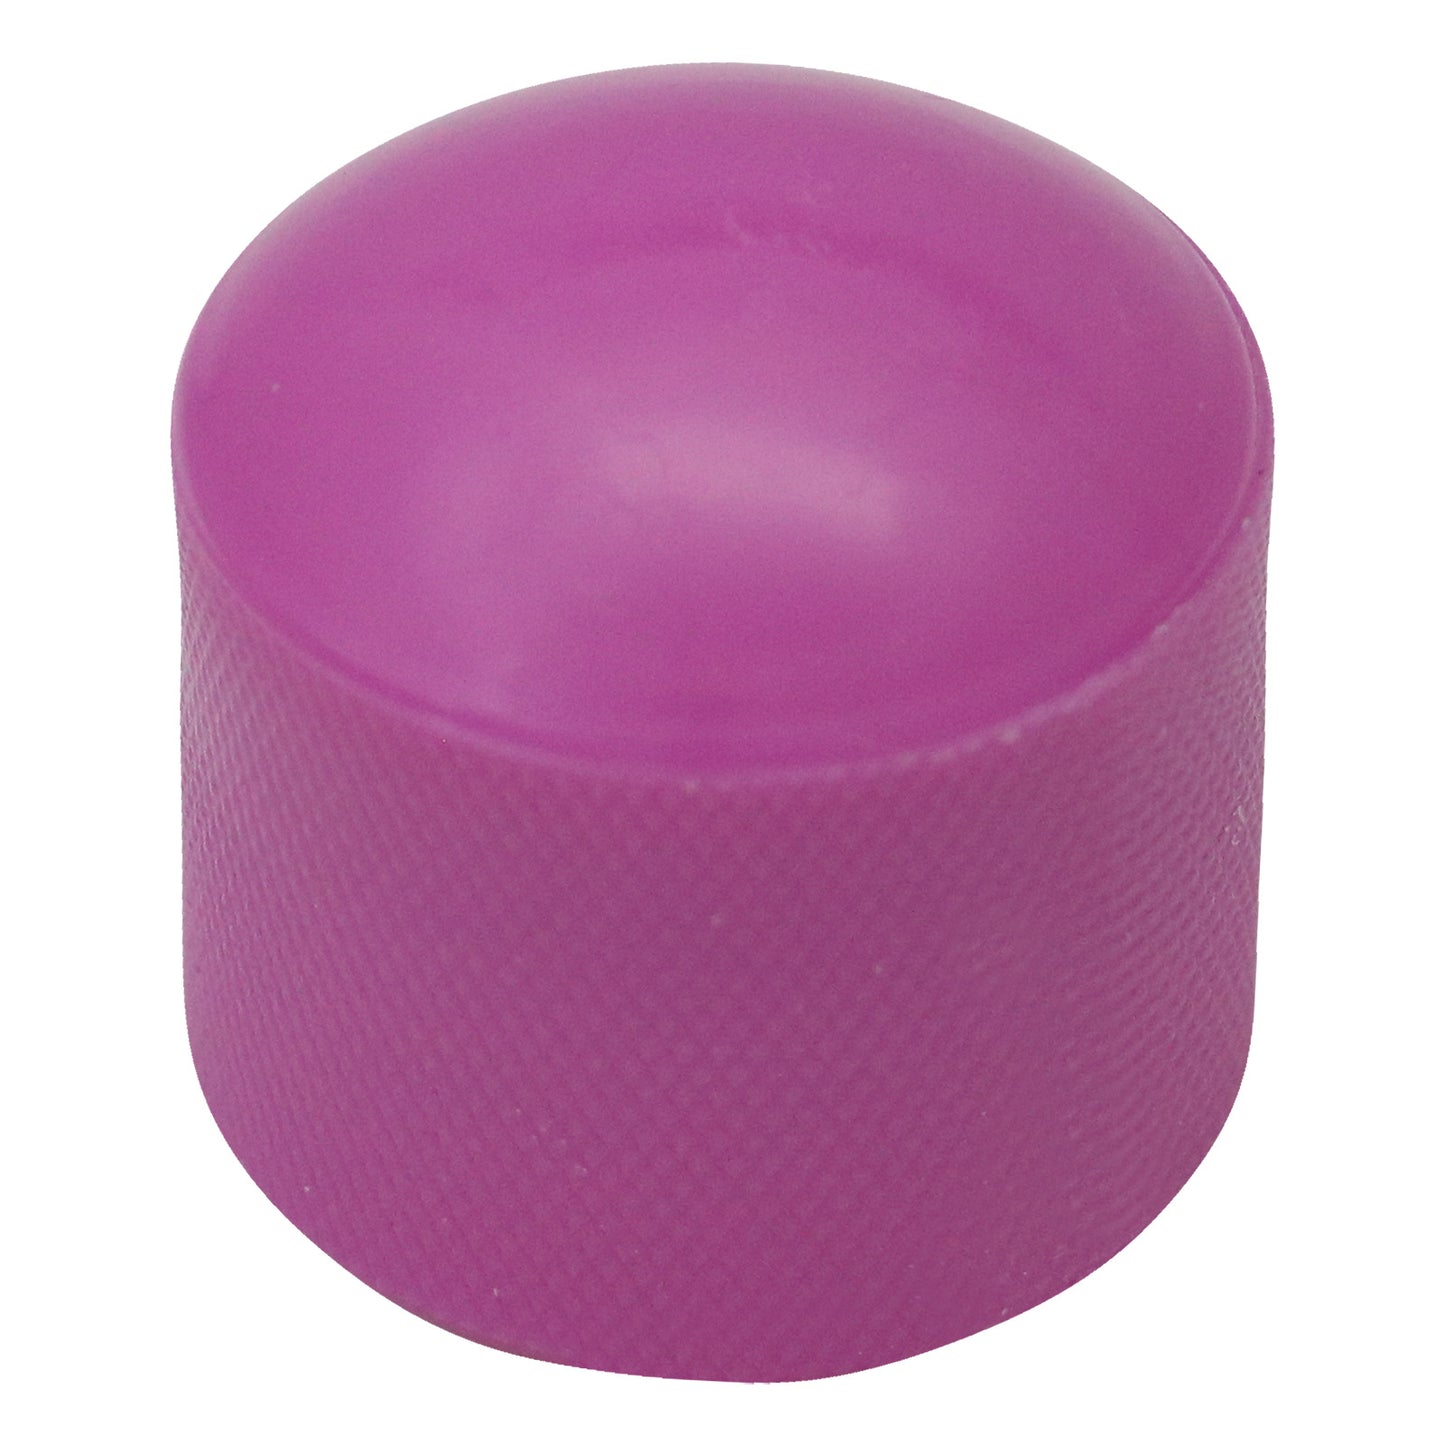 Solid Colour Domed Top Guitar Knob